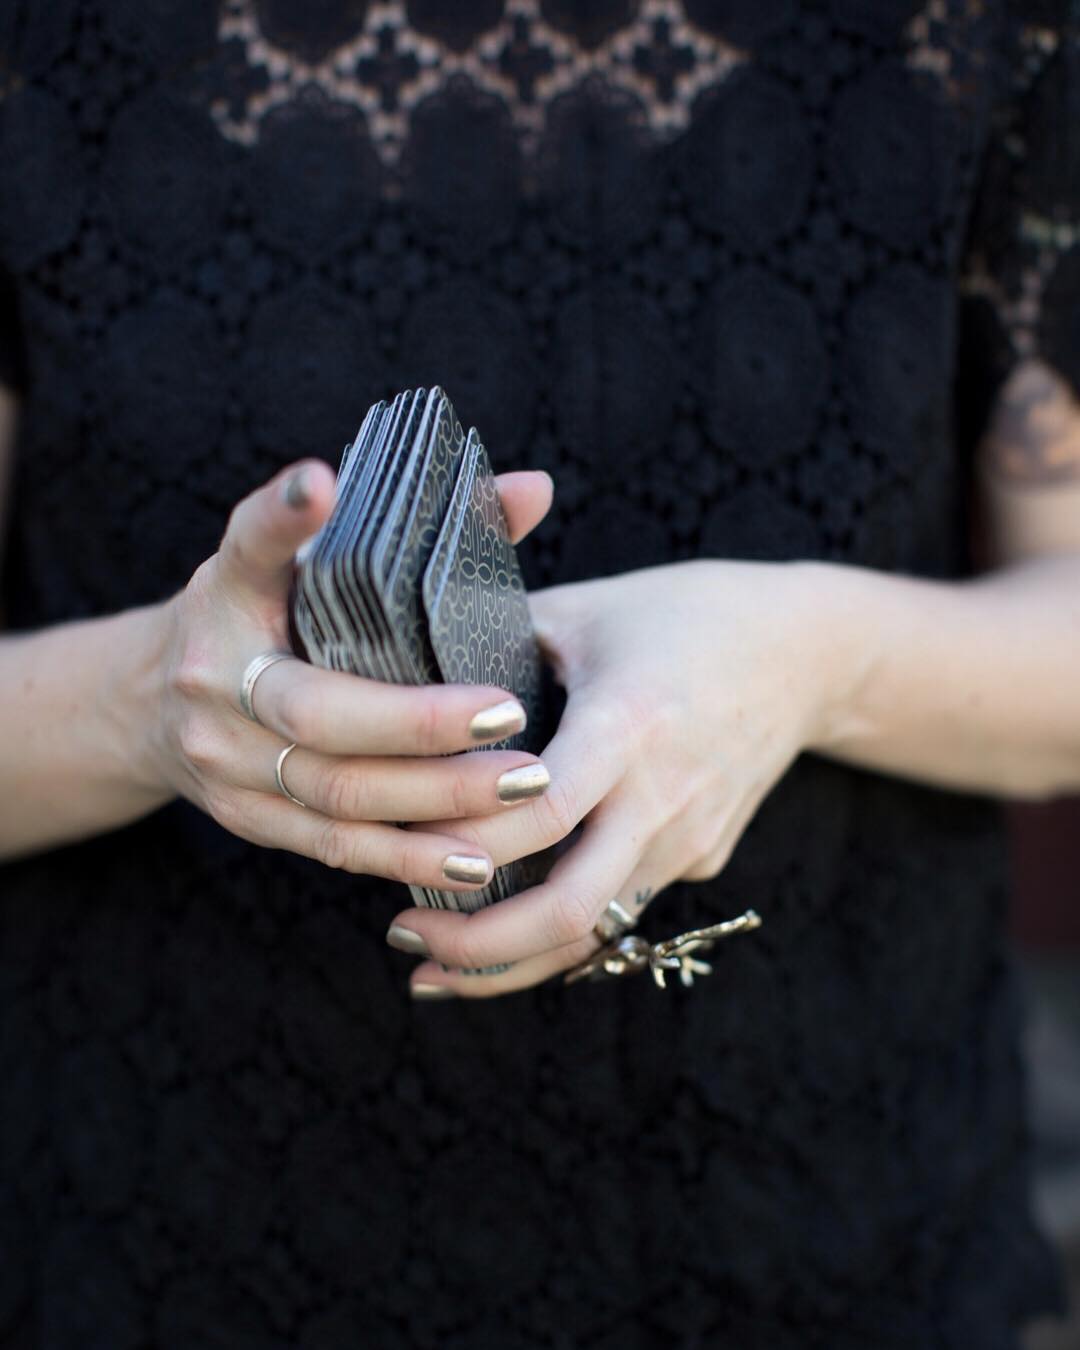 A woman in a dark lace dress with gold nails and gold rings shuffles a deck of Fleurot tarot cards for wedding tarot